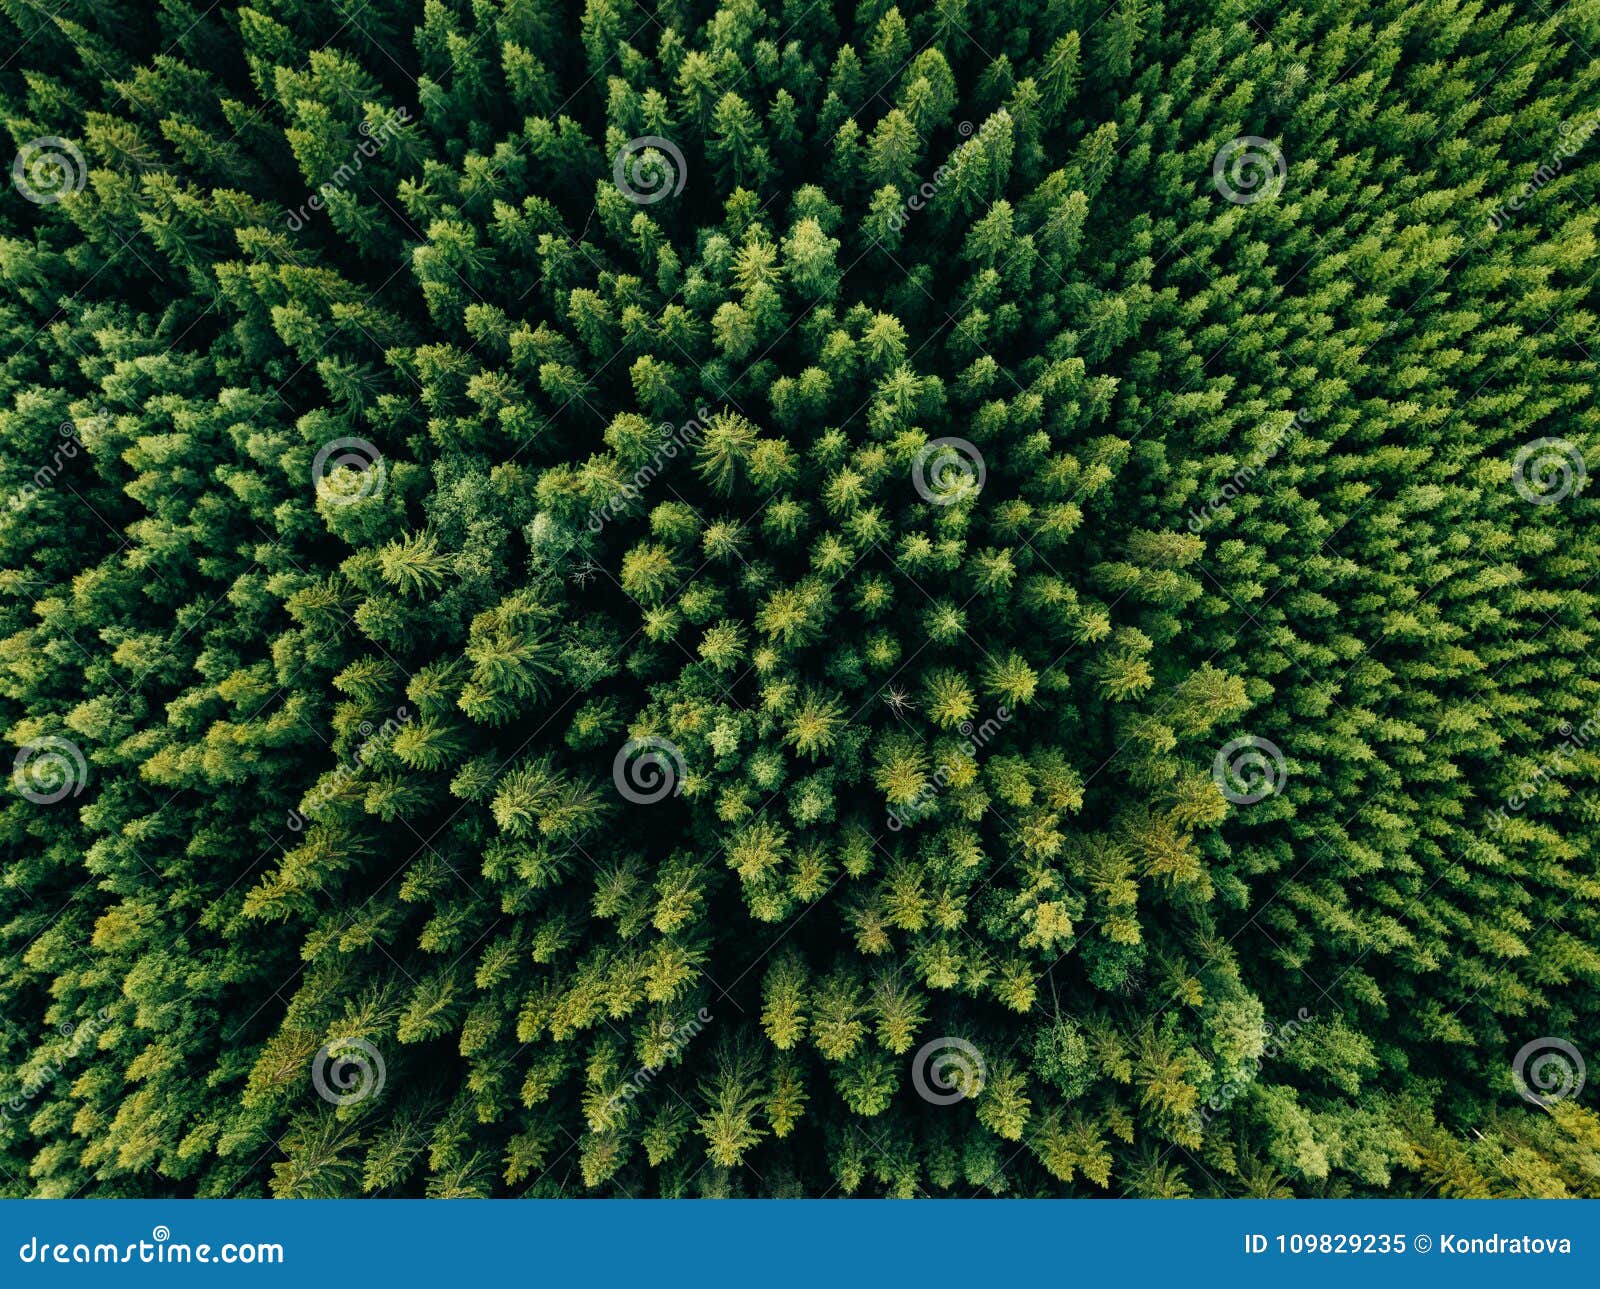 aerial top view of summer green trees in forest in rural finland.